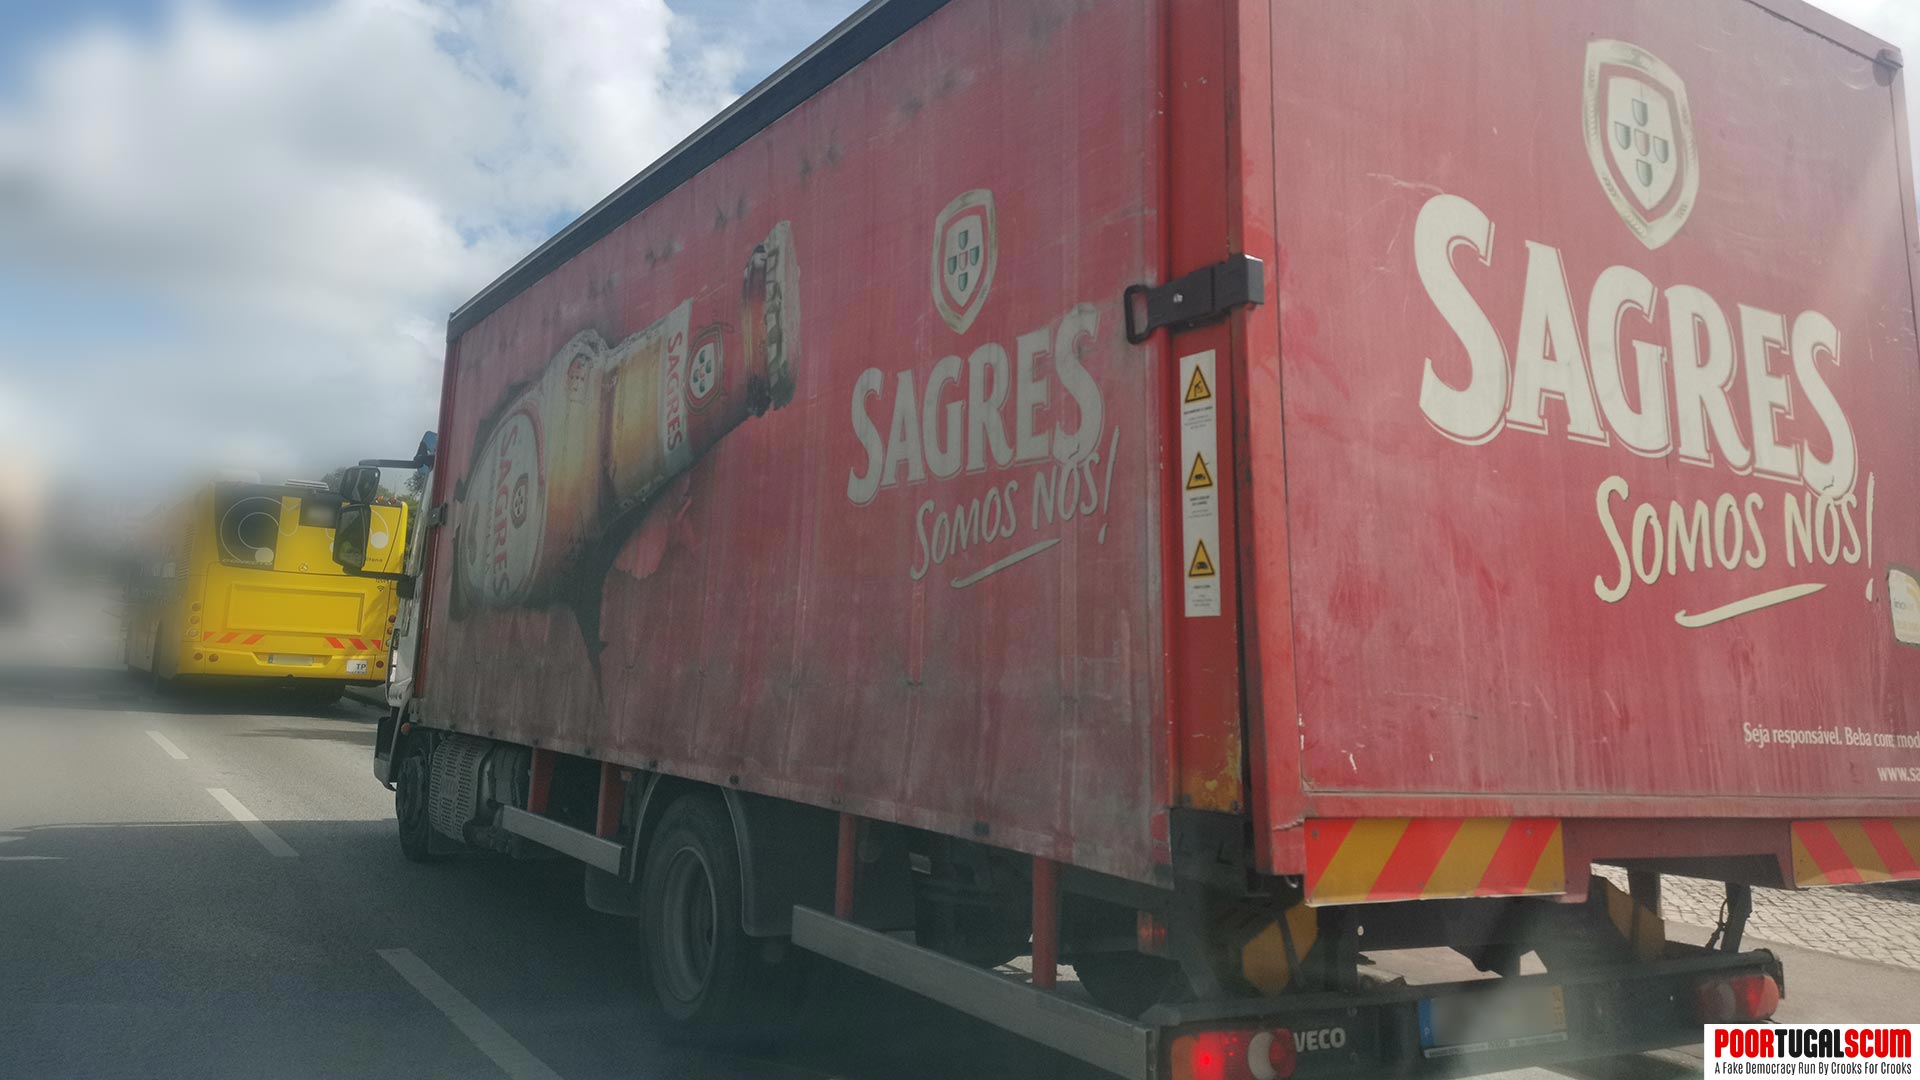 Truck from a Portuguese beer company